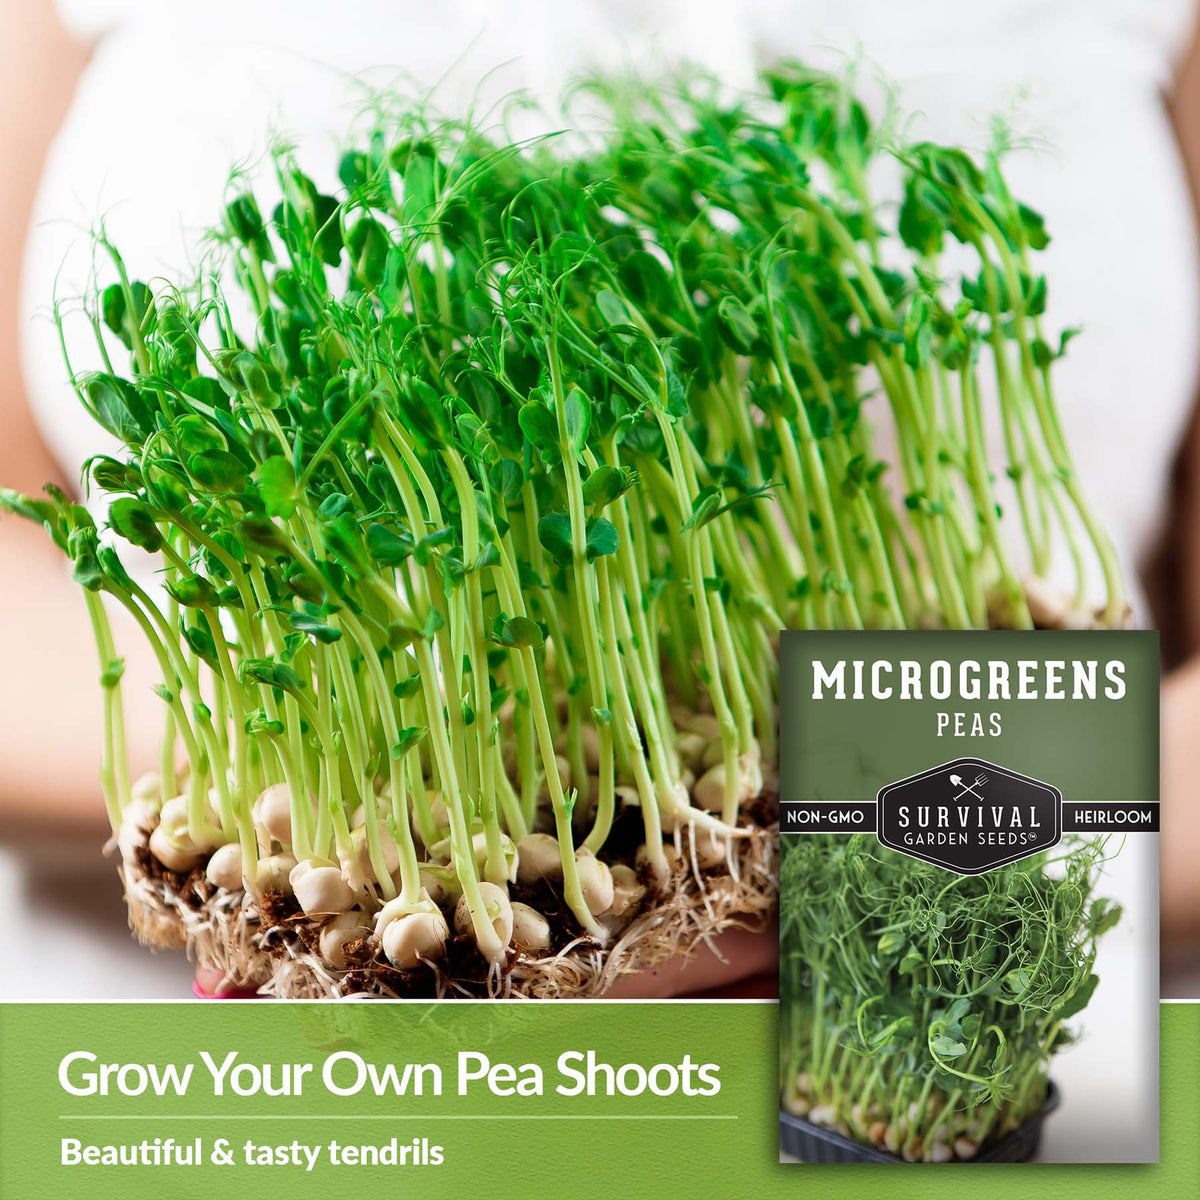 Grow your own pea shoots for beautiful and tasty tendrils